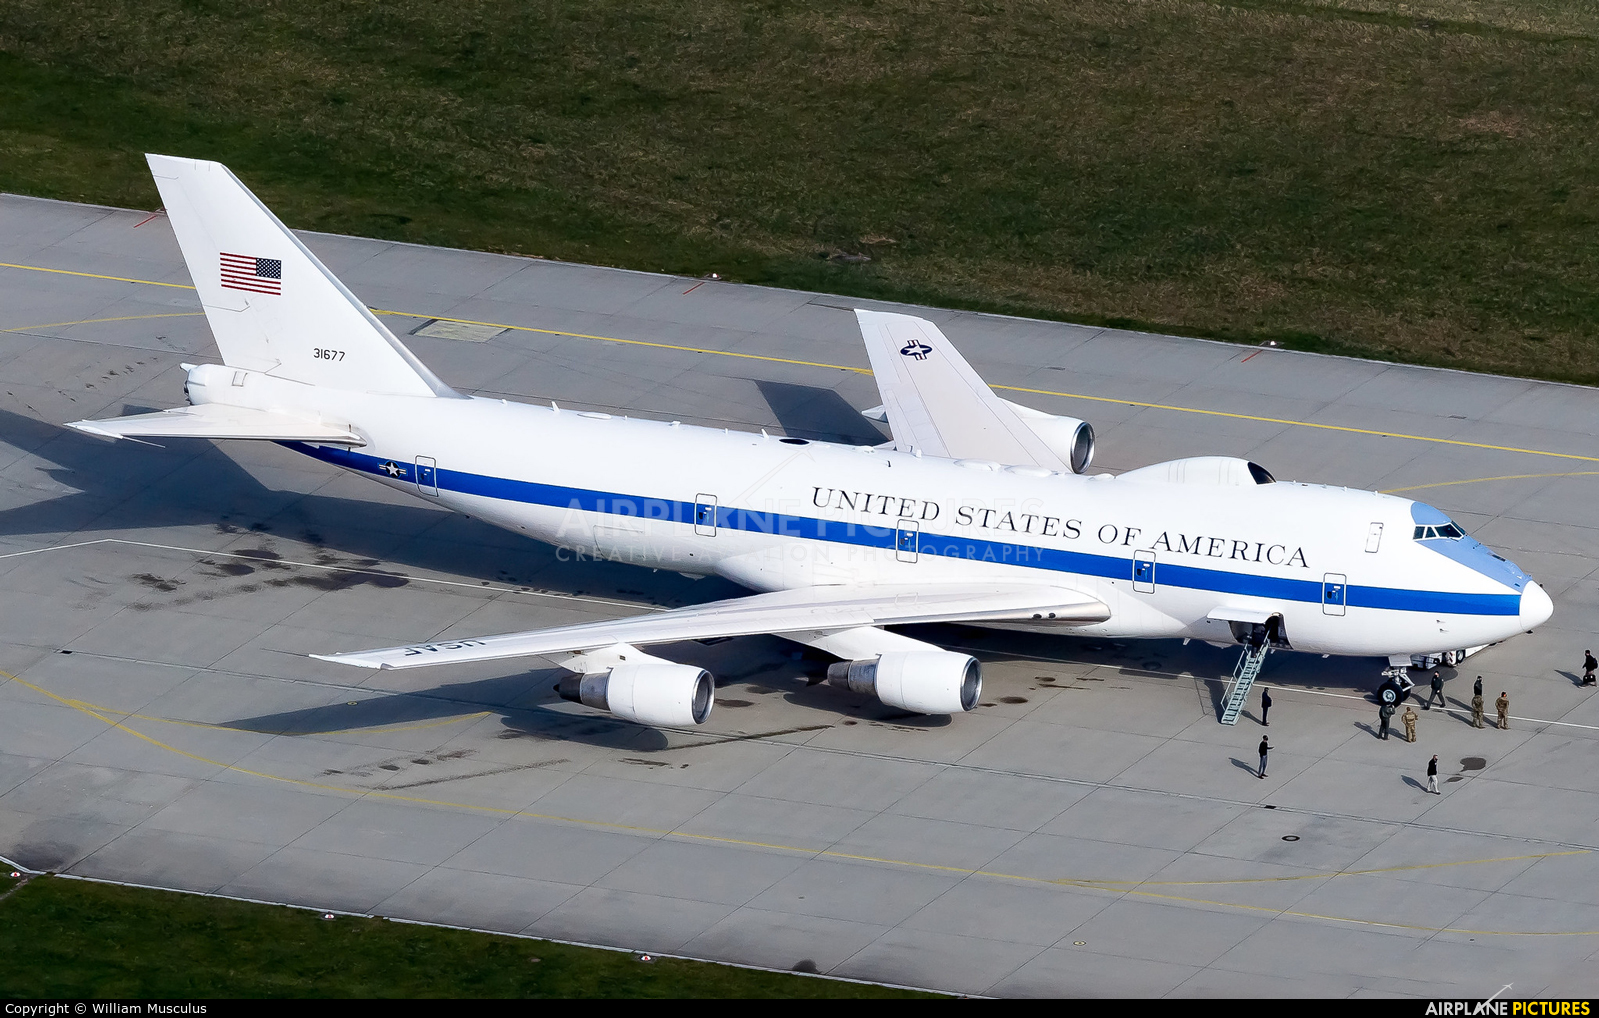 USA - Air Force 73-1677 aircraft at Undisclosed location